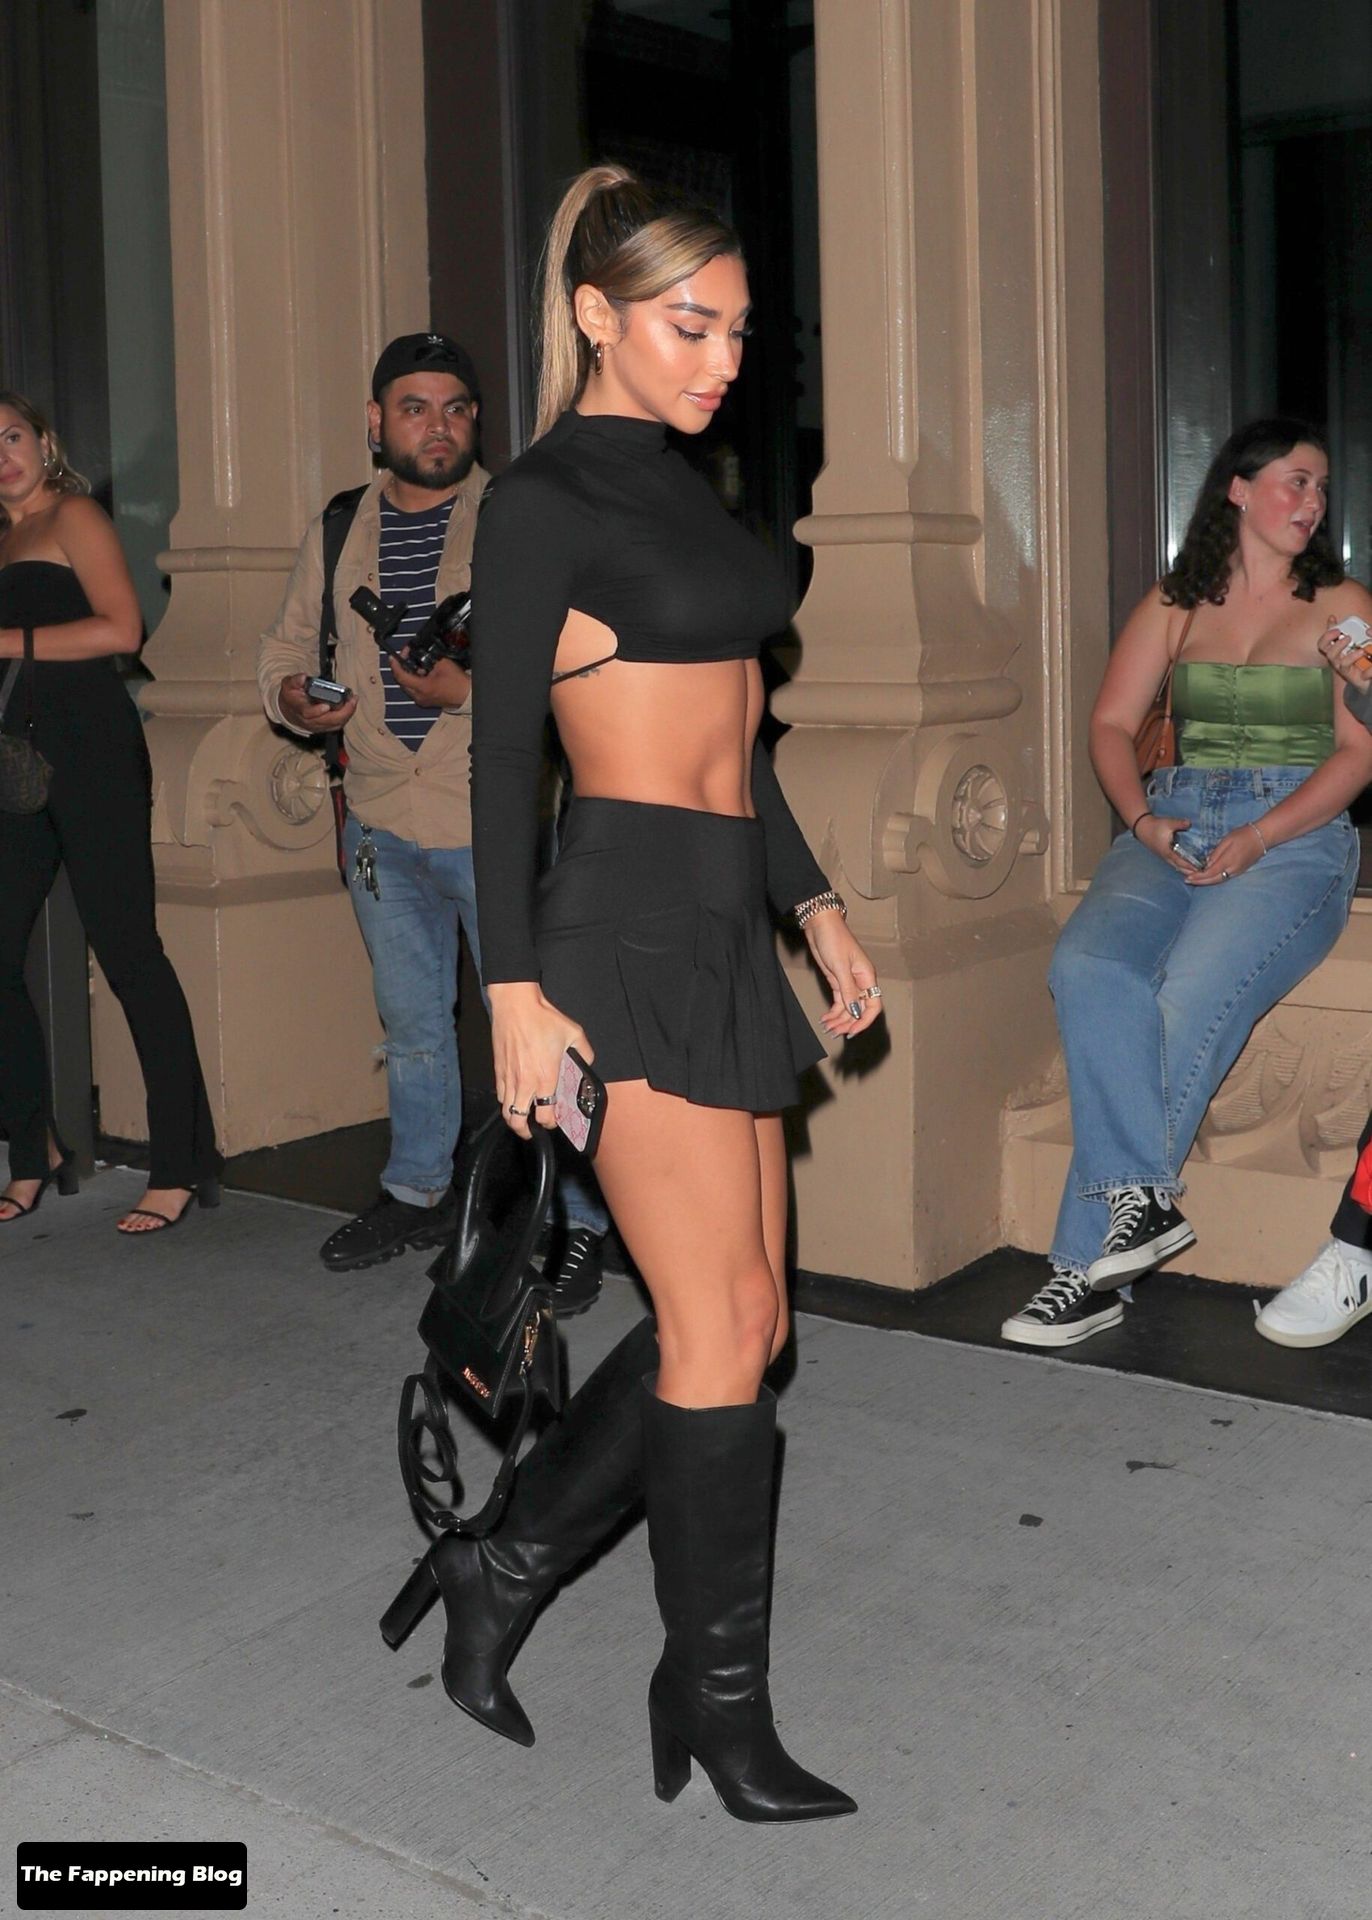 Chantel Jeffries See Through Nudity The Fappening Blog 21 - Chantel Jeffries Looks Stunning Without a Bra Leaving Fai Khadra’s Birthday Party in NYC (33 Photos)